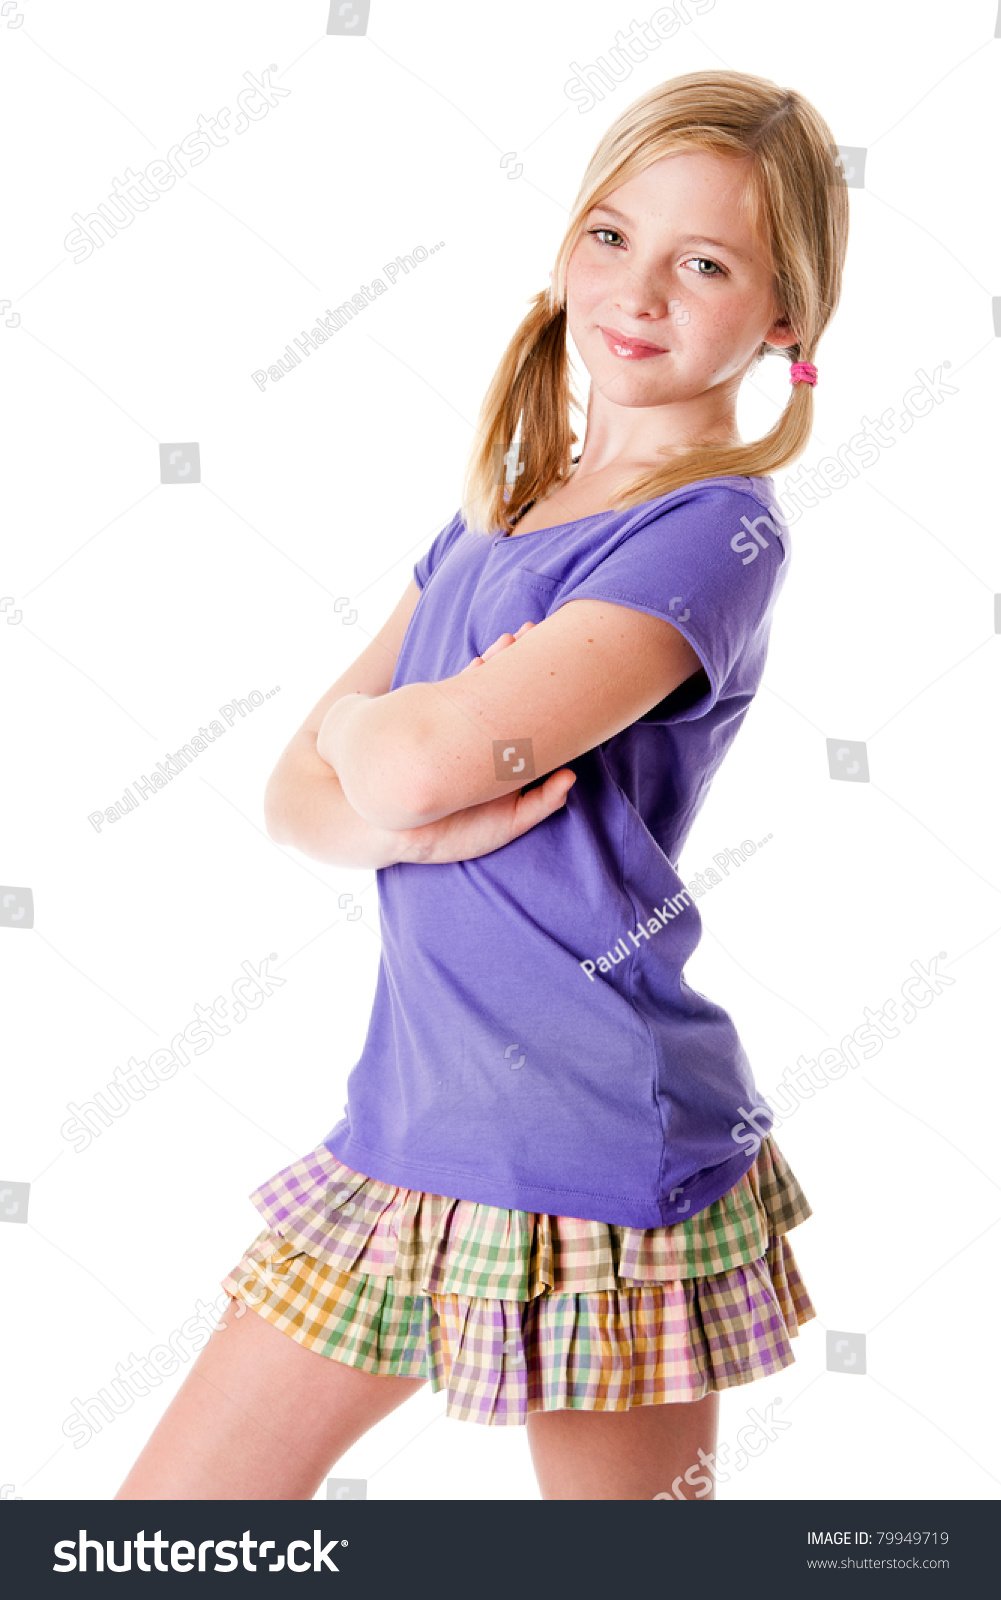 Beautiful Happy Cute Teenager Girl With Skirt And Purple Shirt Summer ...